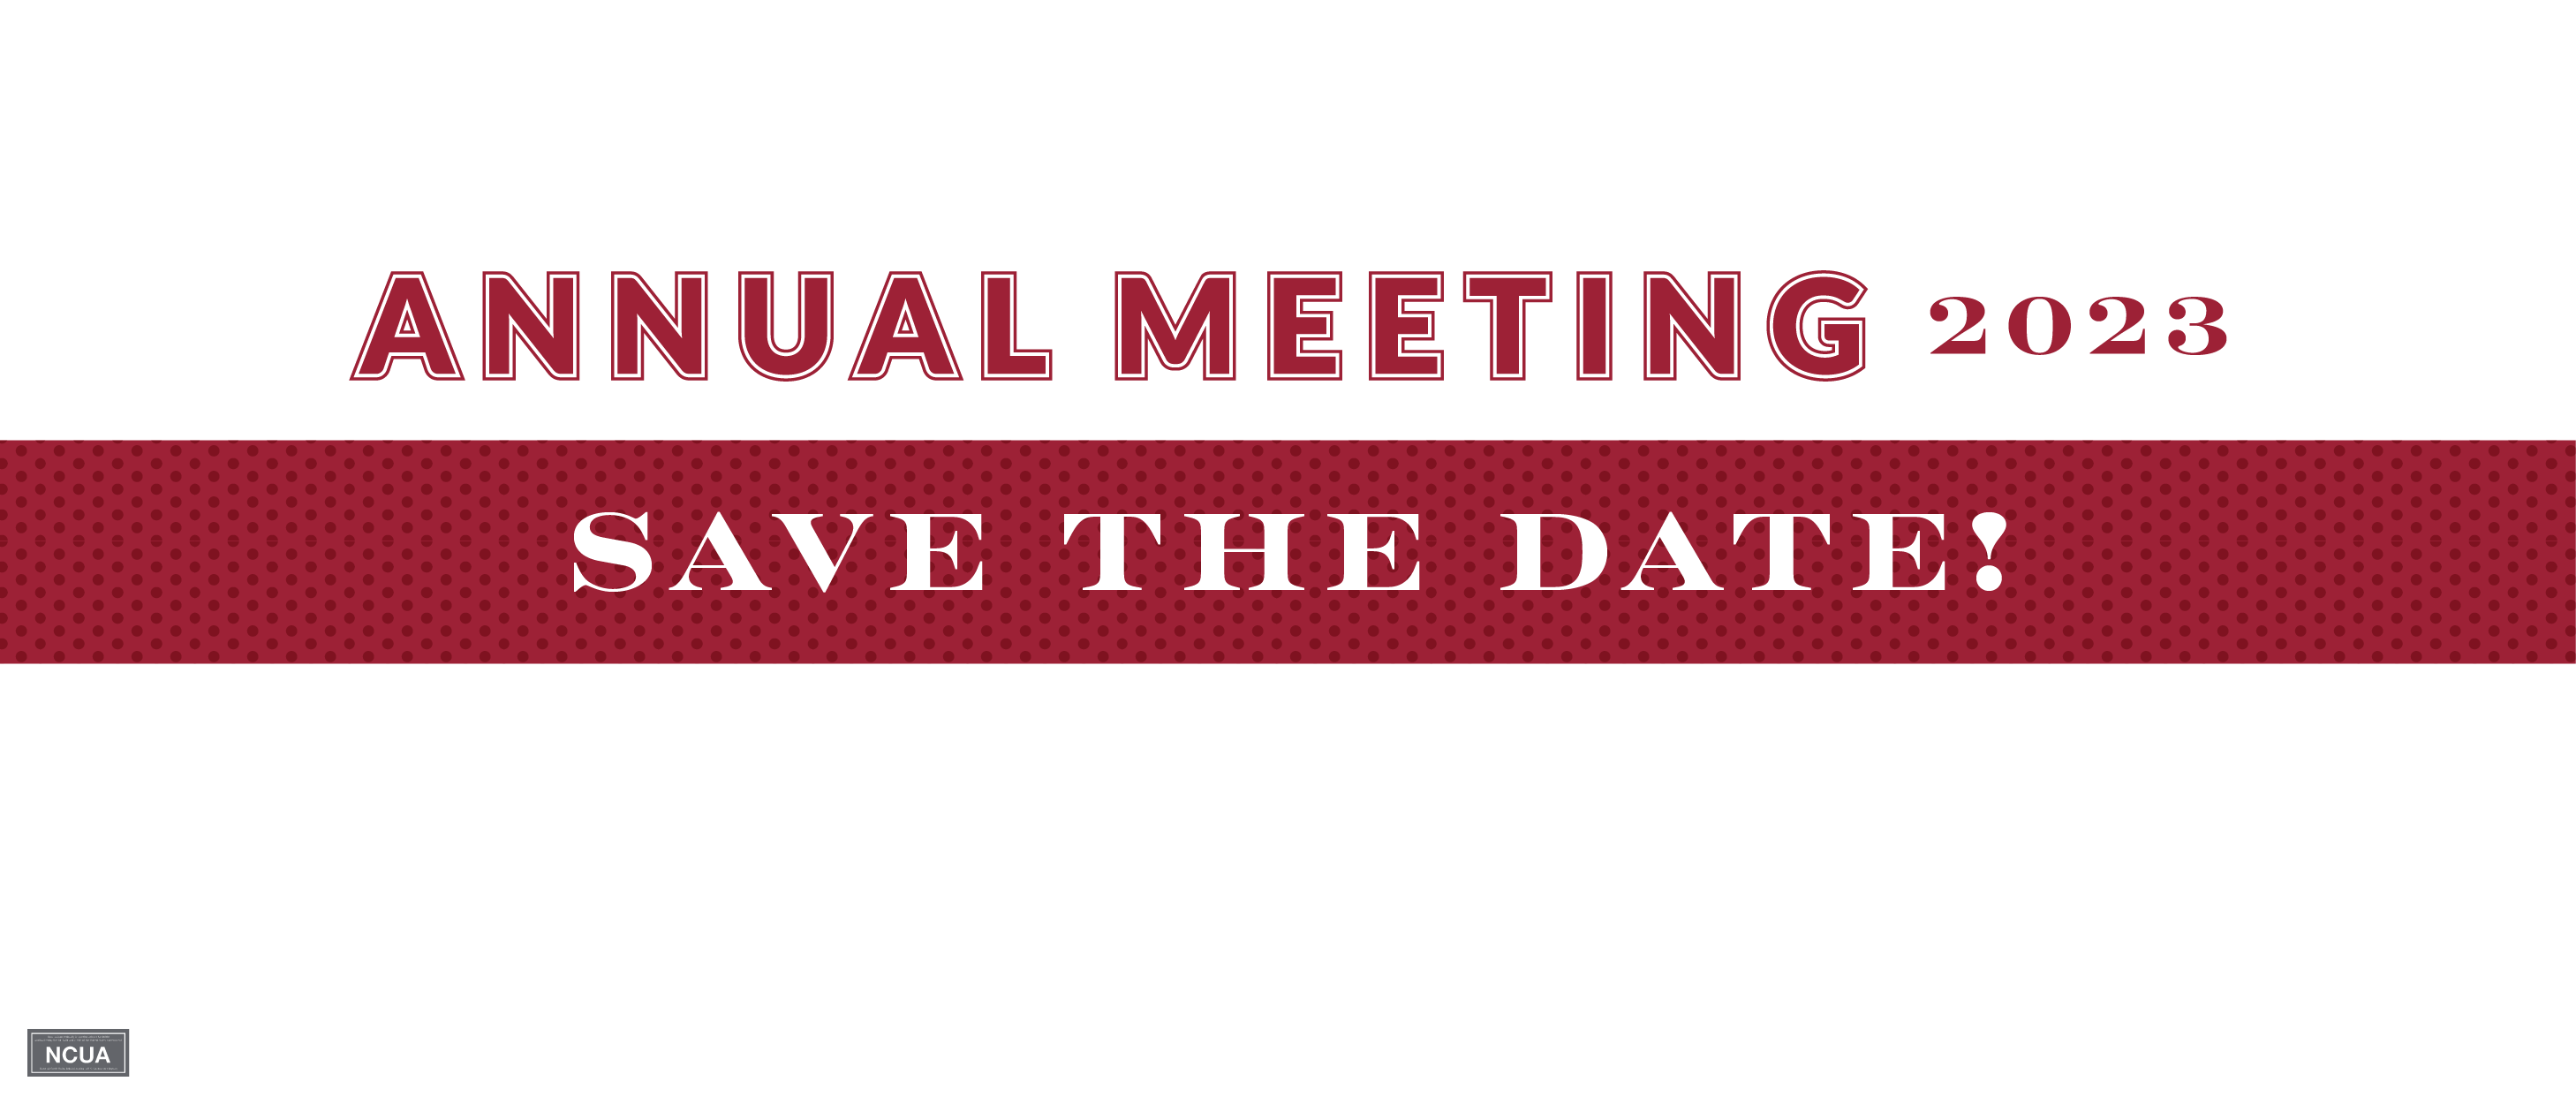 Annual Meeting - Save the Date